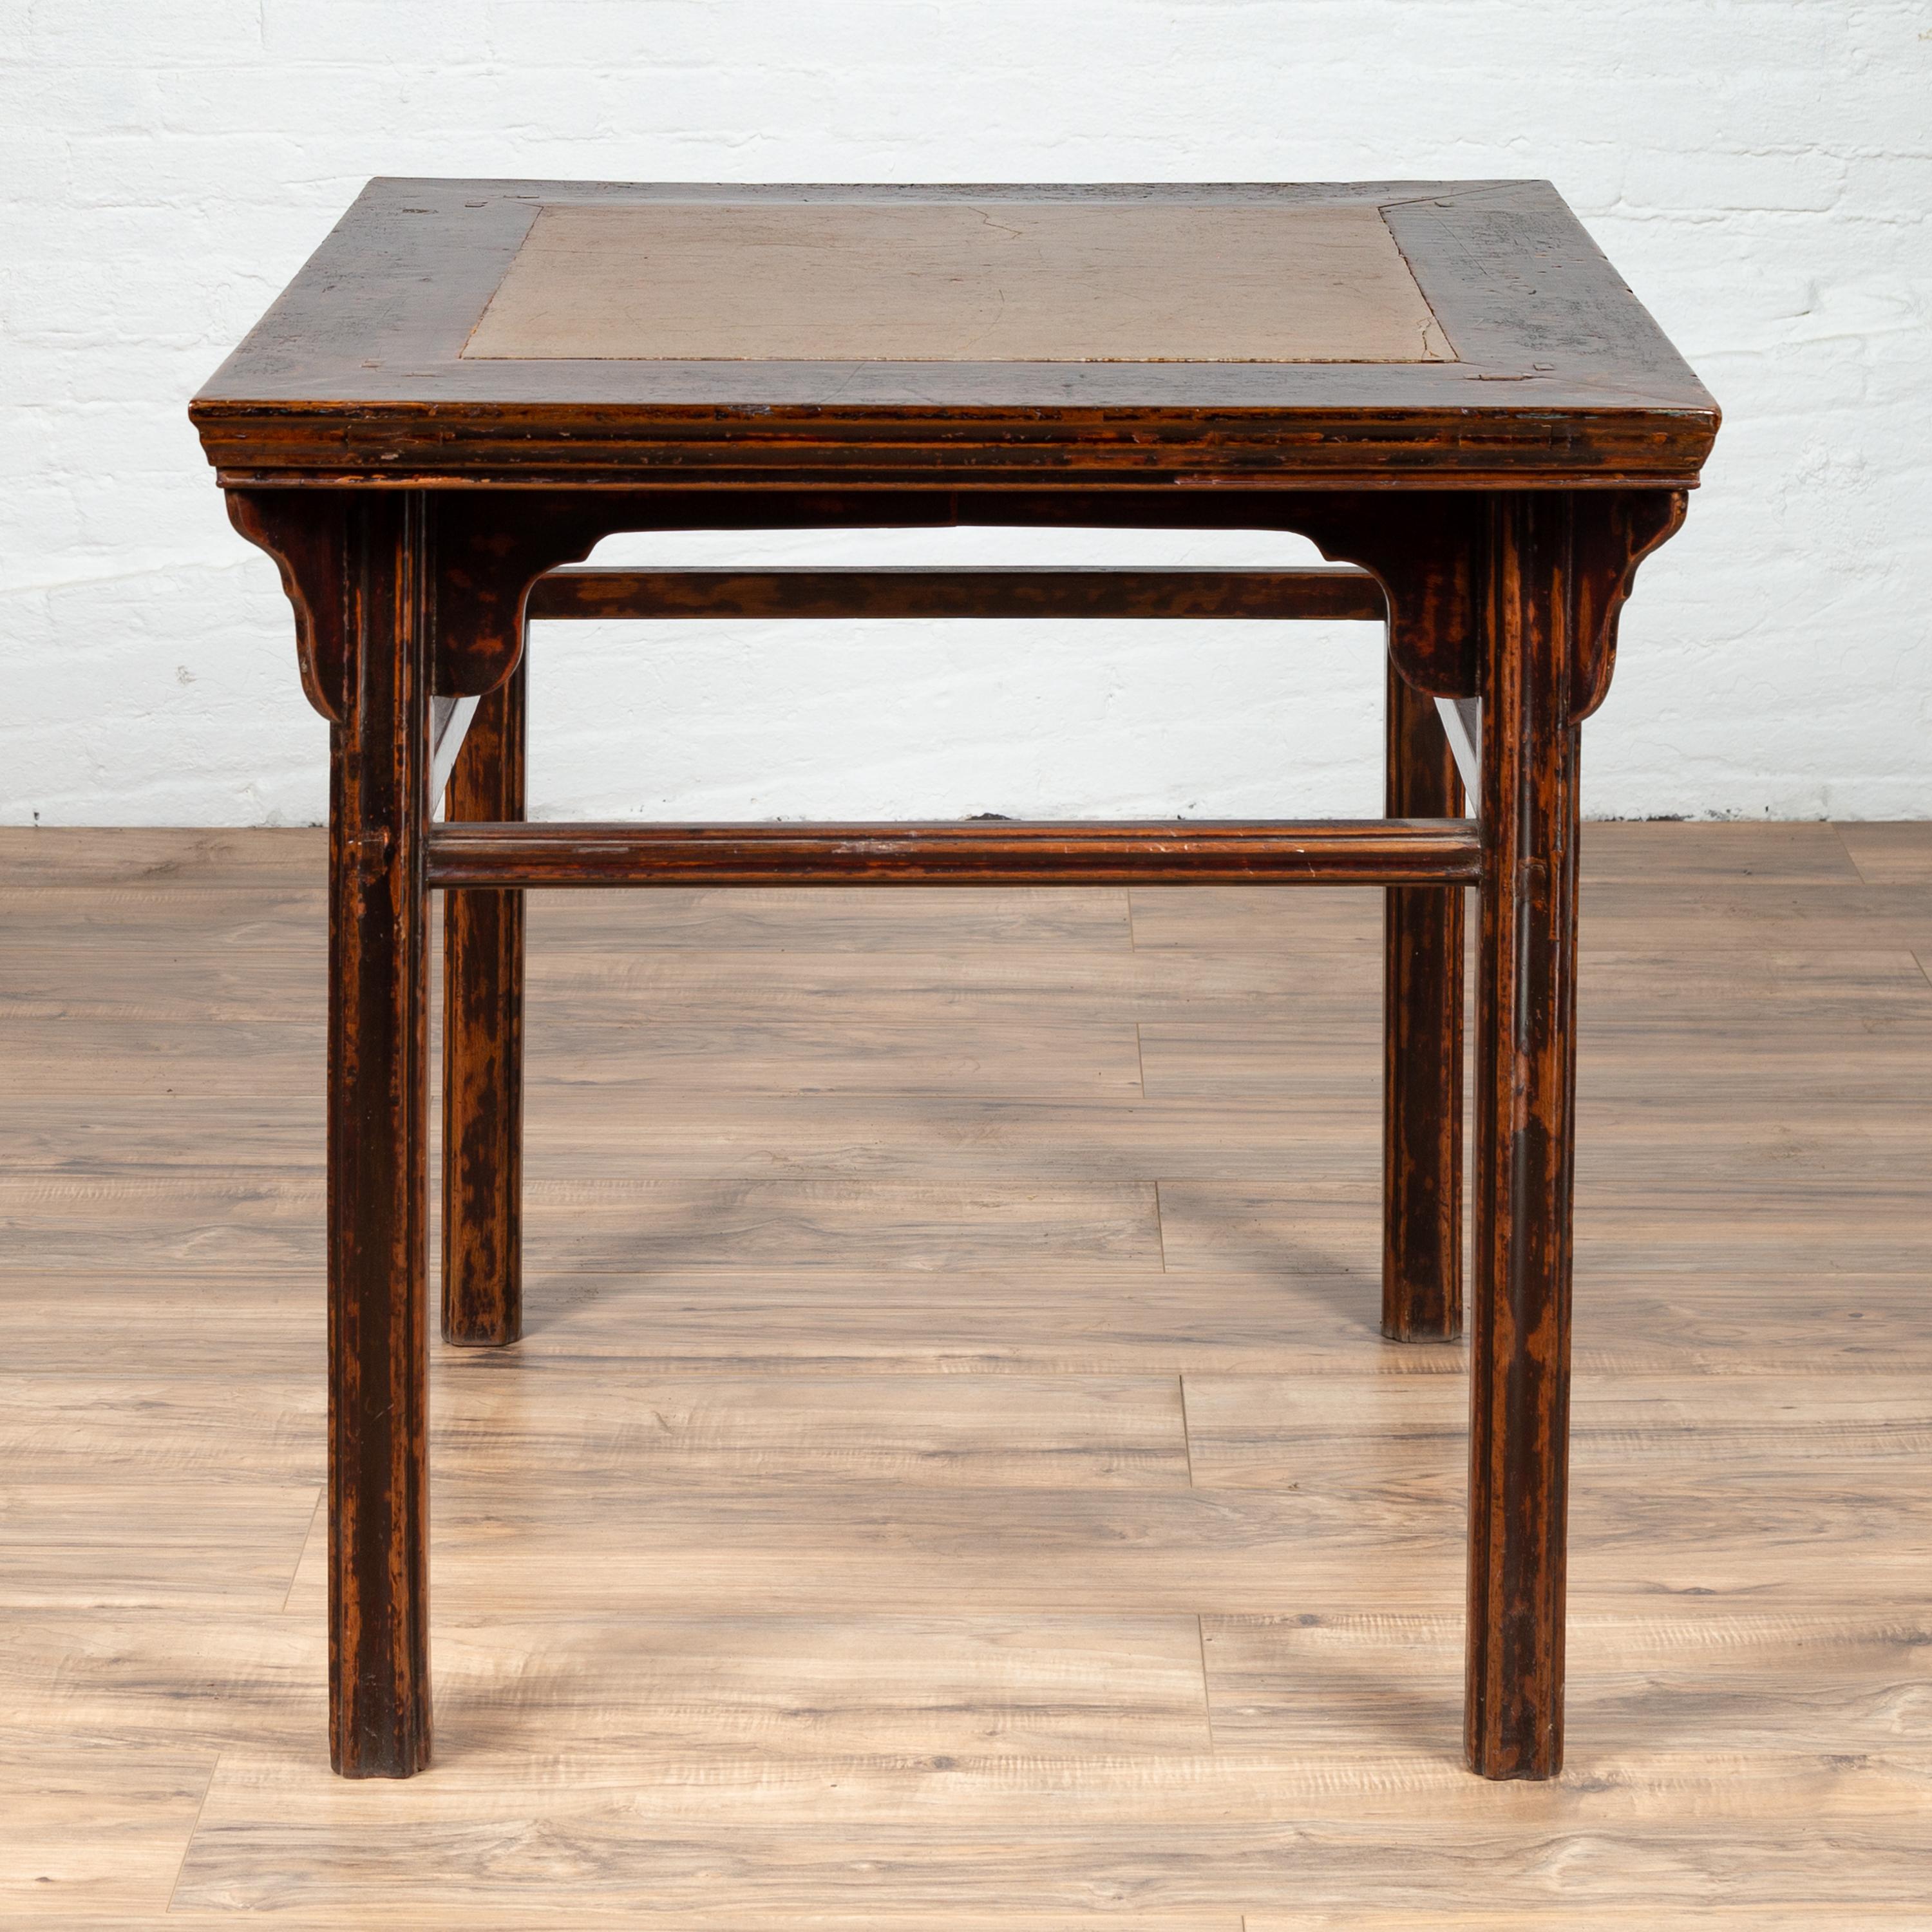 A Chinese 19th century elmwood center hall table with Ming dynasty 15th or 16th century courtyard stone inset. Born in China during the 19th century, this elegant center table features a square top, adorned with a Ming dynasty courtyard stone inset